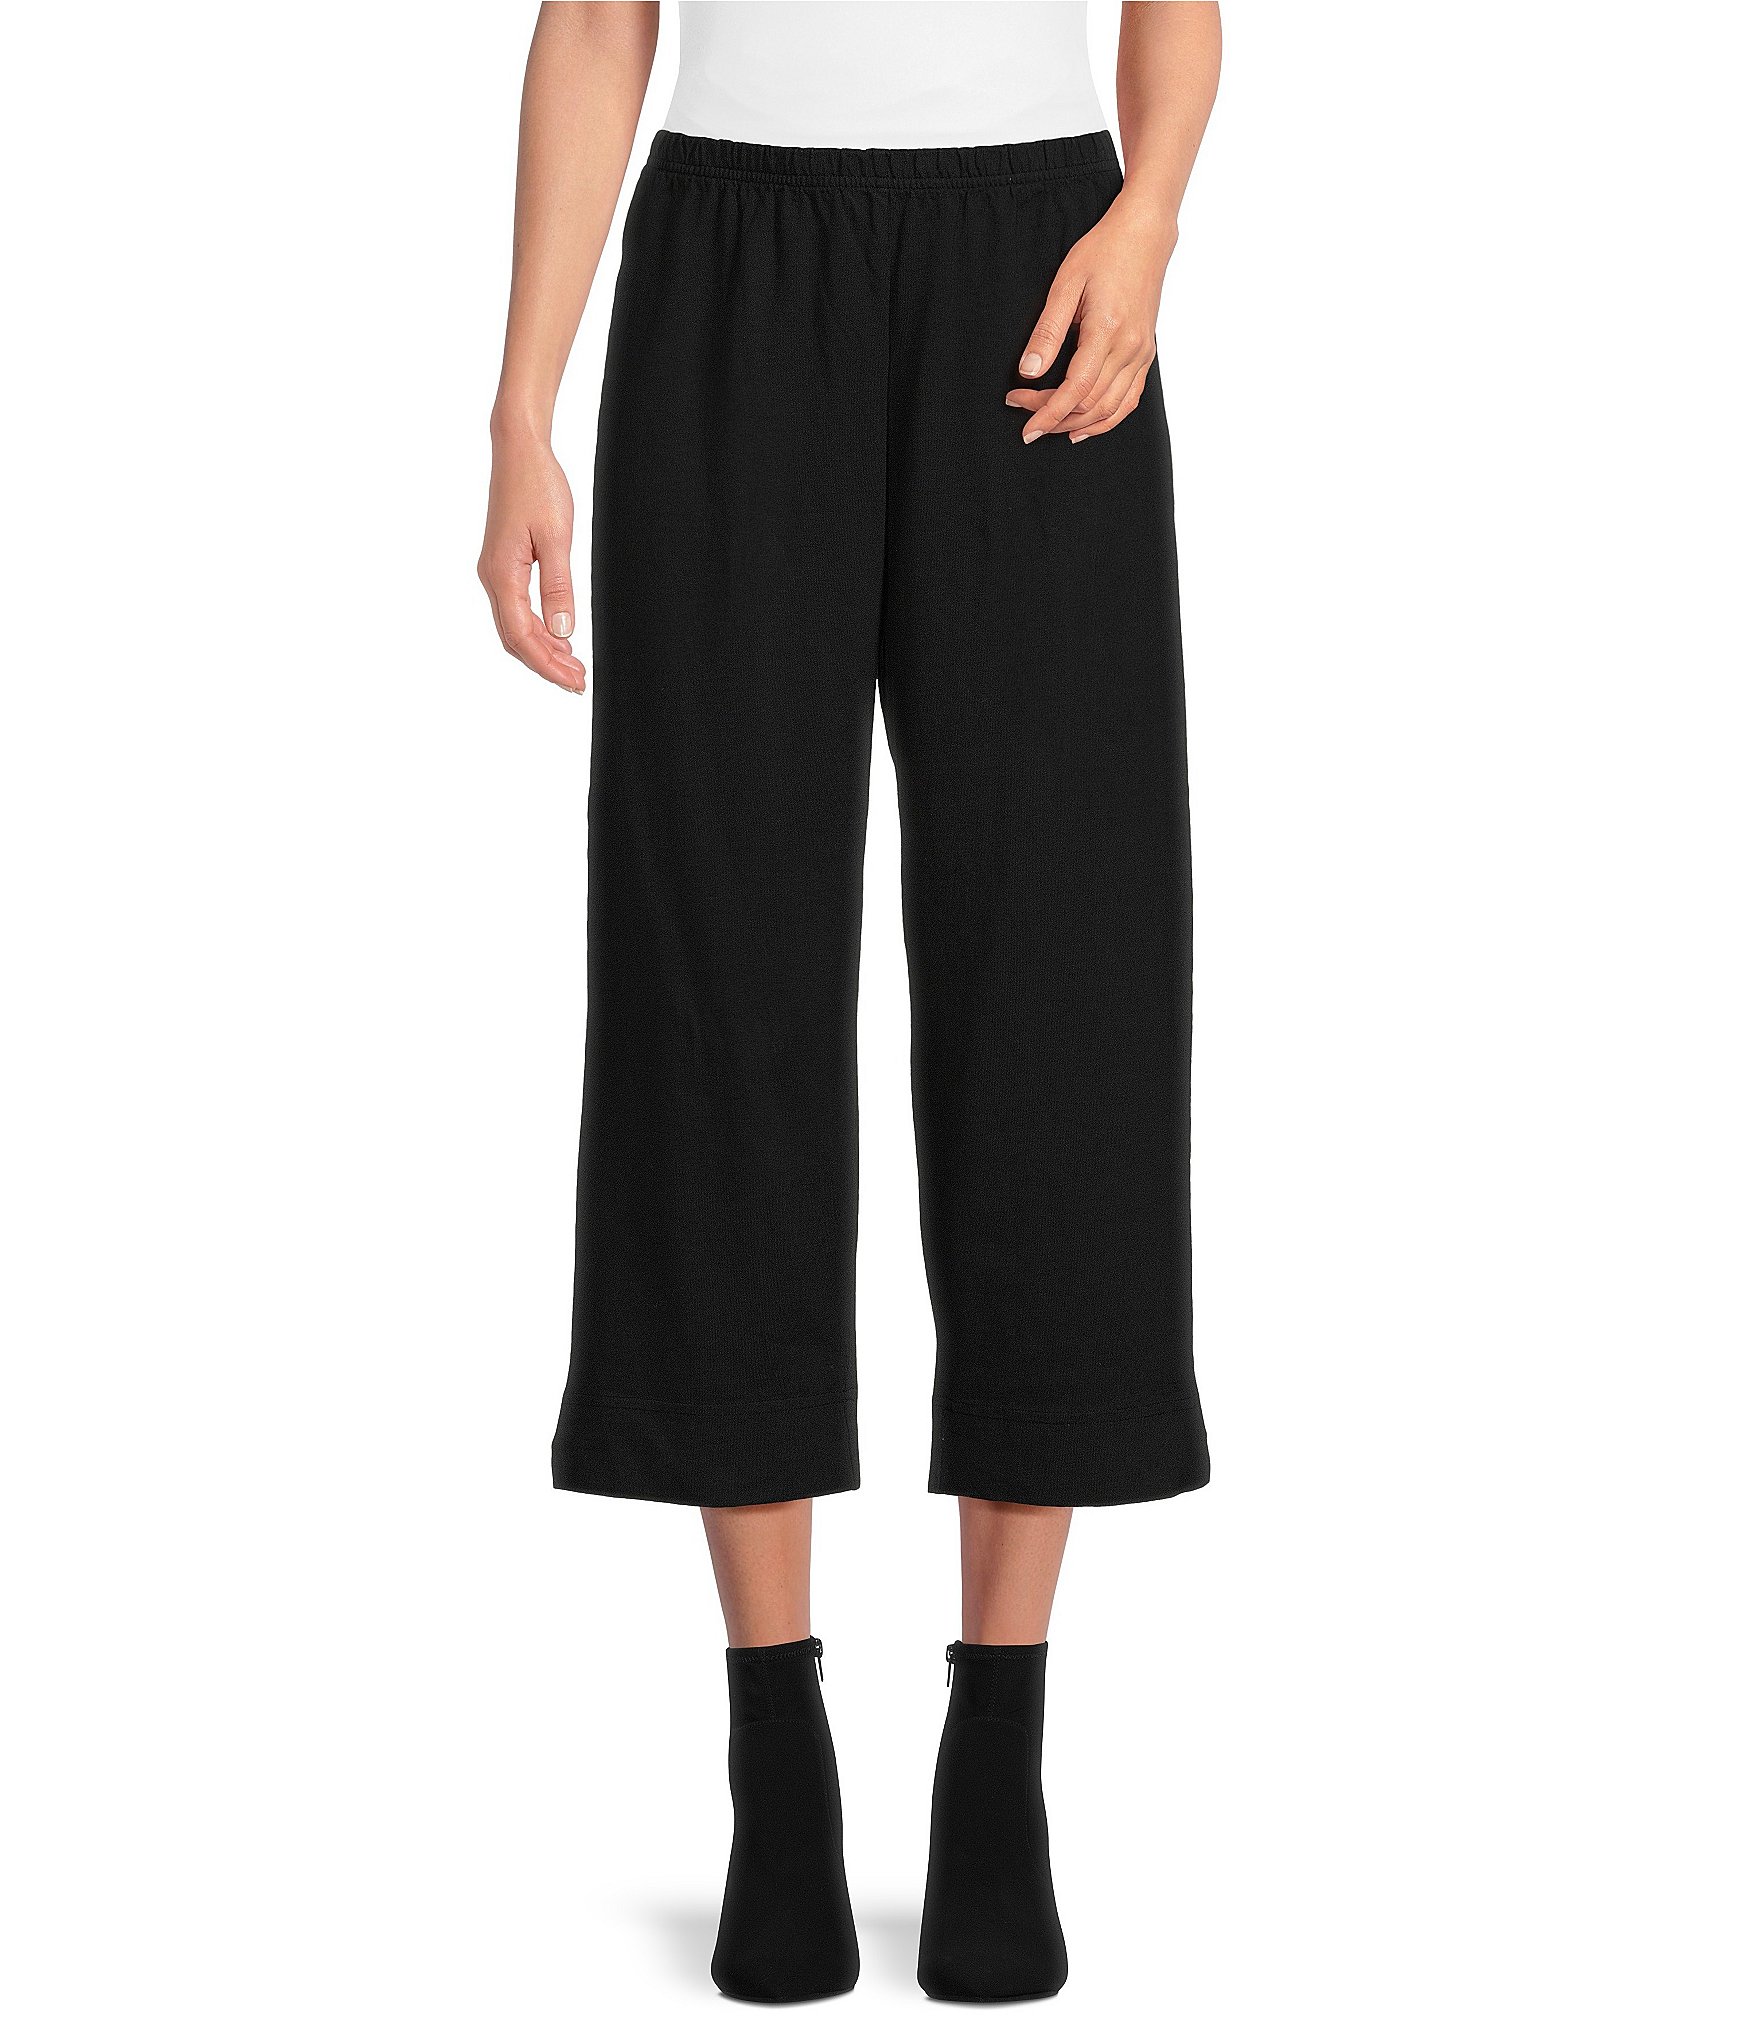 Straight-leg technical cotton jersey pants in Black for